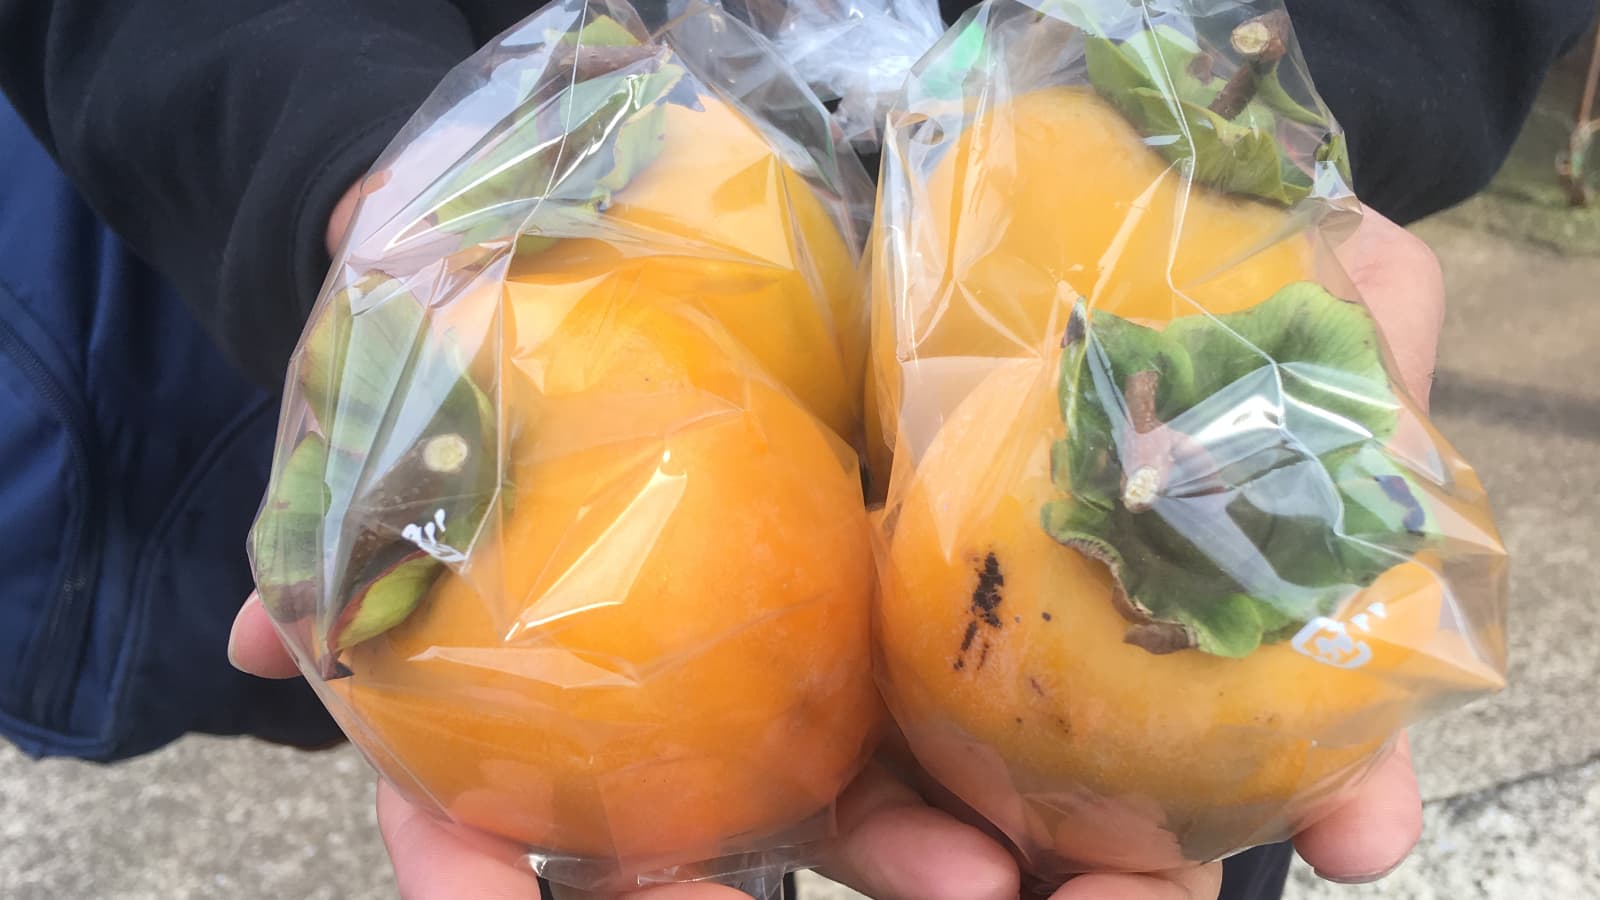 A handful of persimmons sold from a vending machine from a Tokyo urban farm.